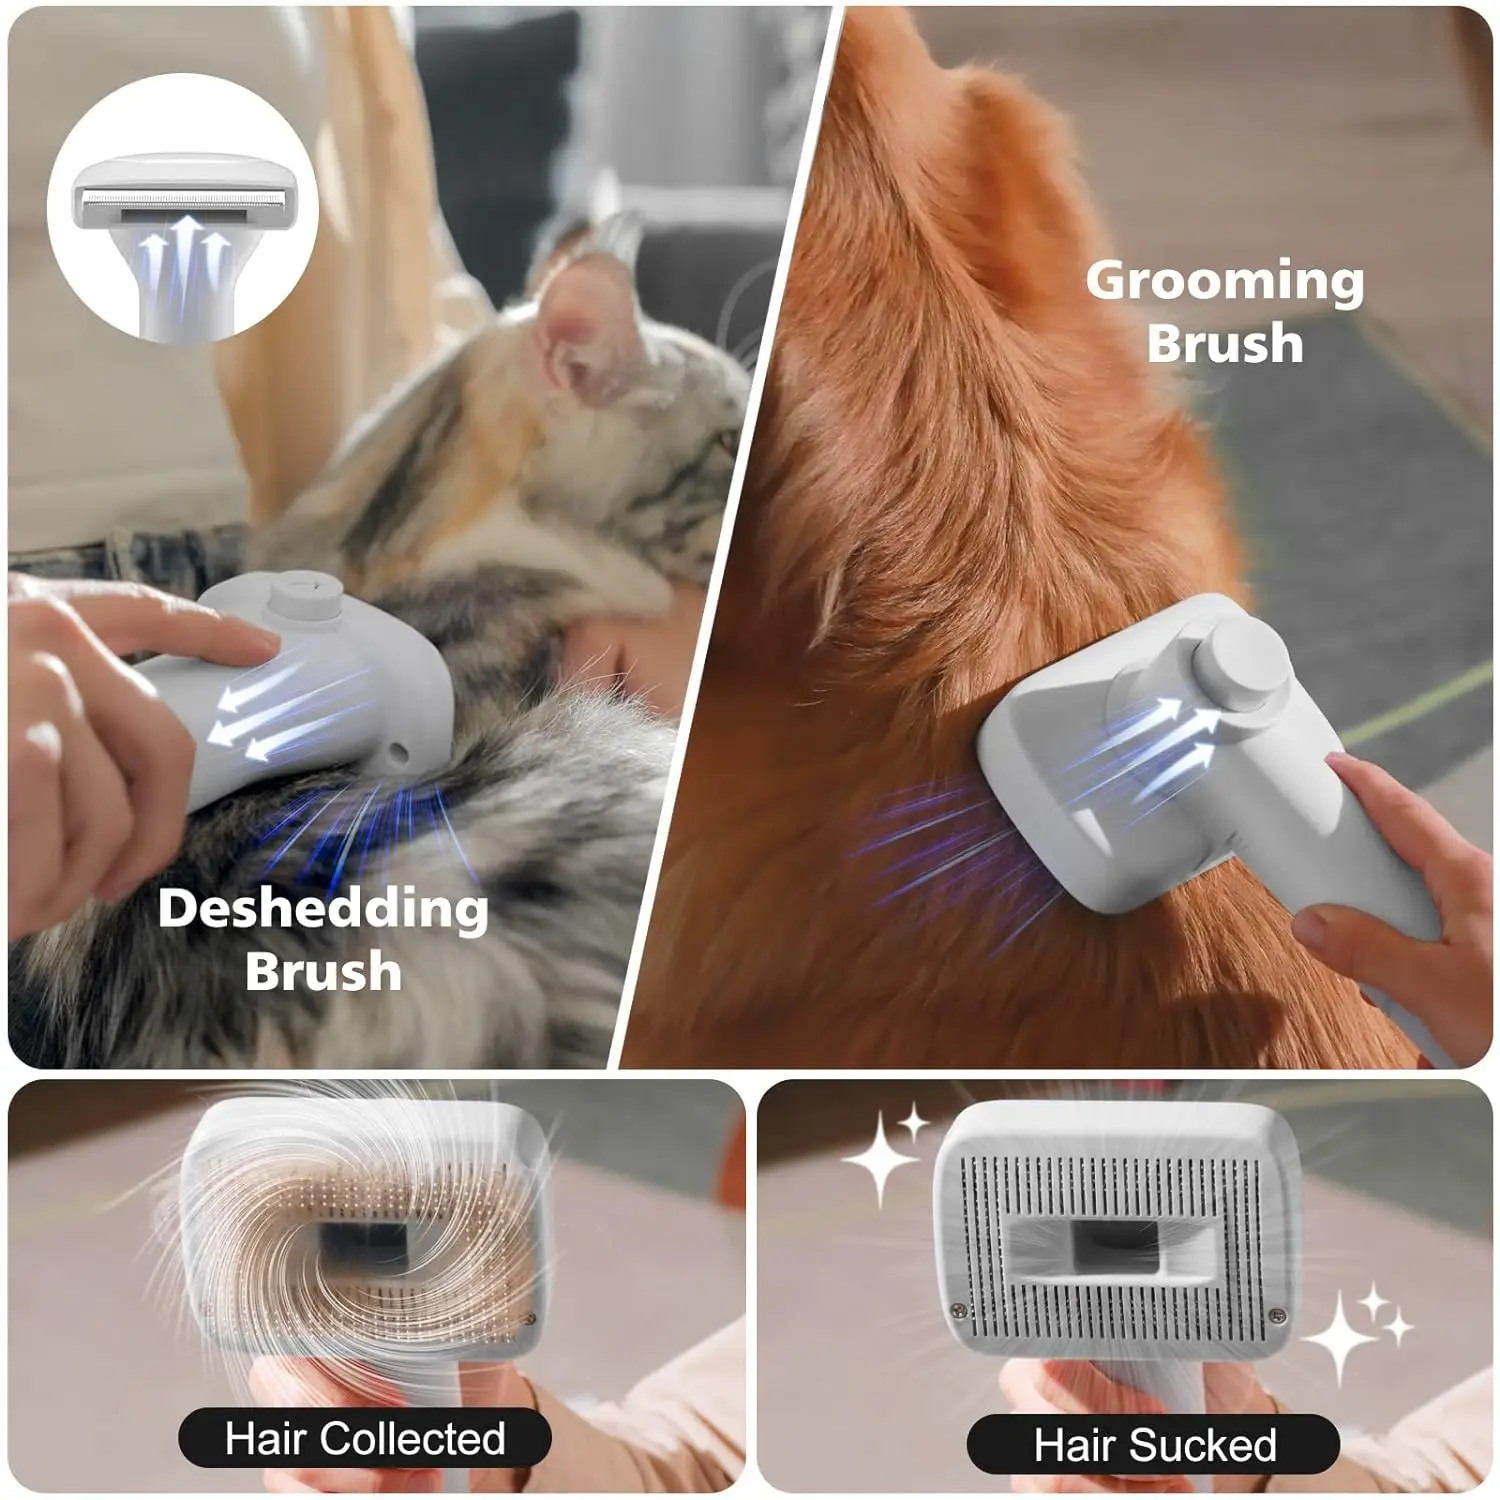 Dog Grooming Kit 6-in-1 Professional Pet Grooming Vacuum Picks up 99% Pet Hair 2.6L Hair Collection Cup for Trimming